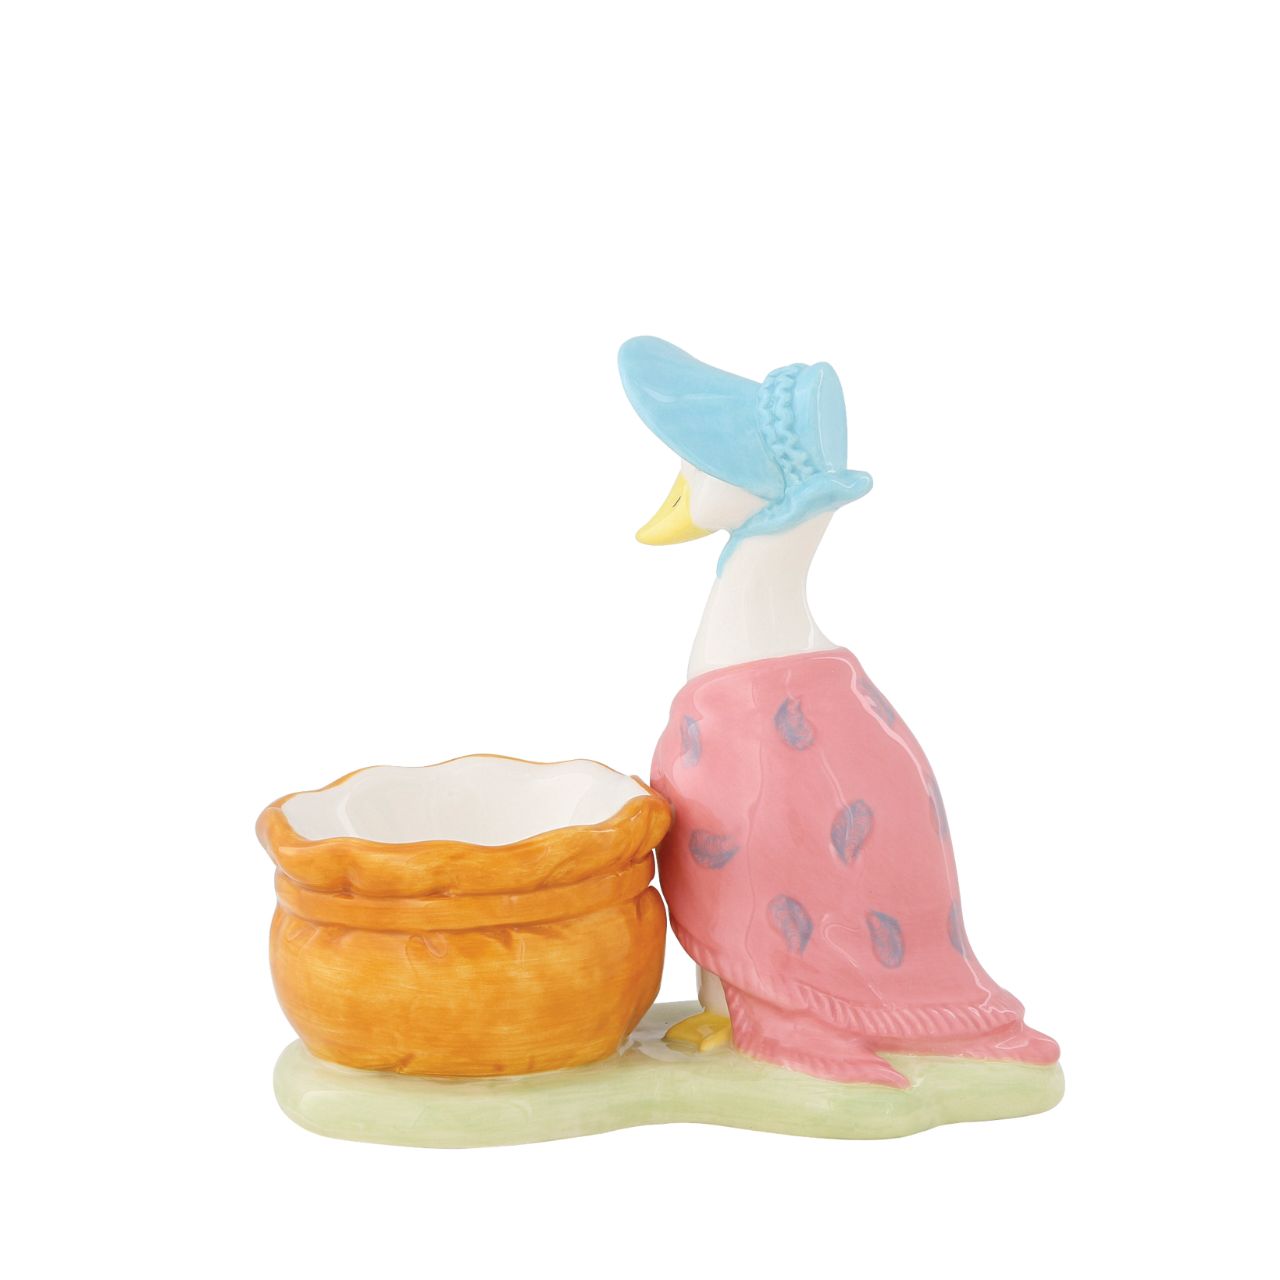 Peter Rabbit Jemima Puddle-Duck Egg Cup  Serve your morning eggs in style with our unique and charming Jemima Puddle-duck egg cup, because regular egg cups aren't all they're cracked up to be... This beautiful Beatrix Potter egg cup has been made from sturdy ceramic and makes the ideal collector's piece or gift.